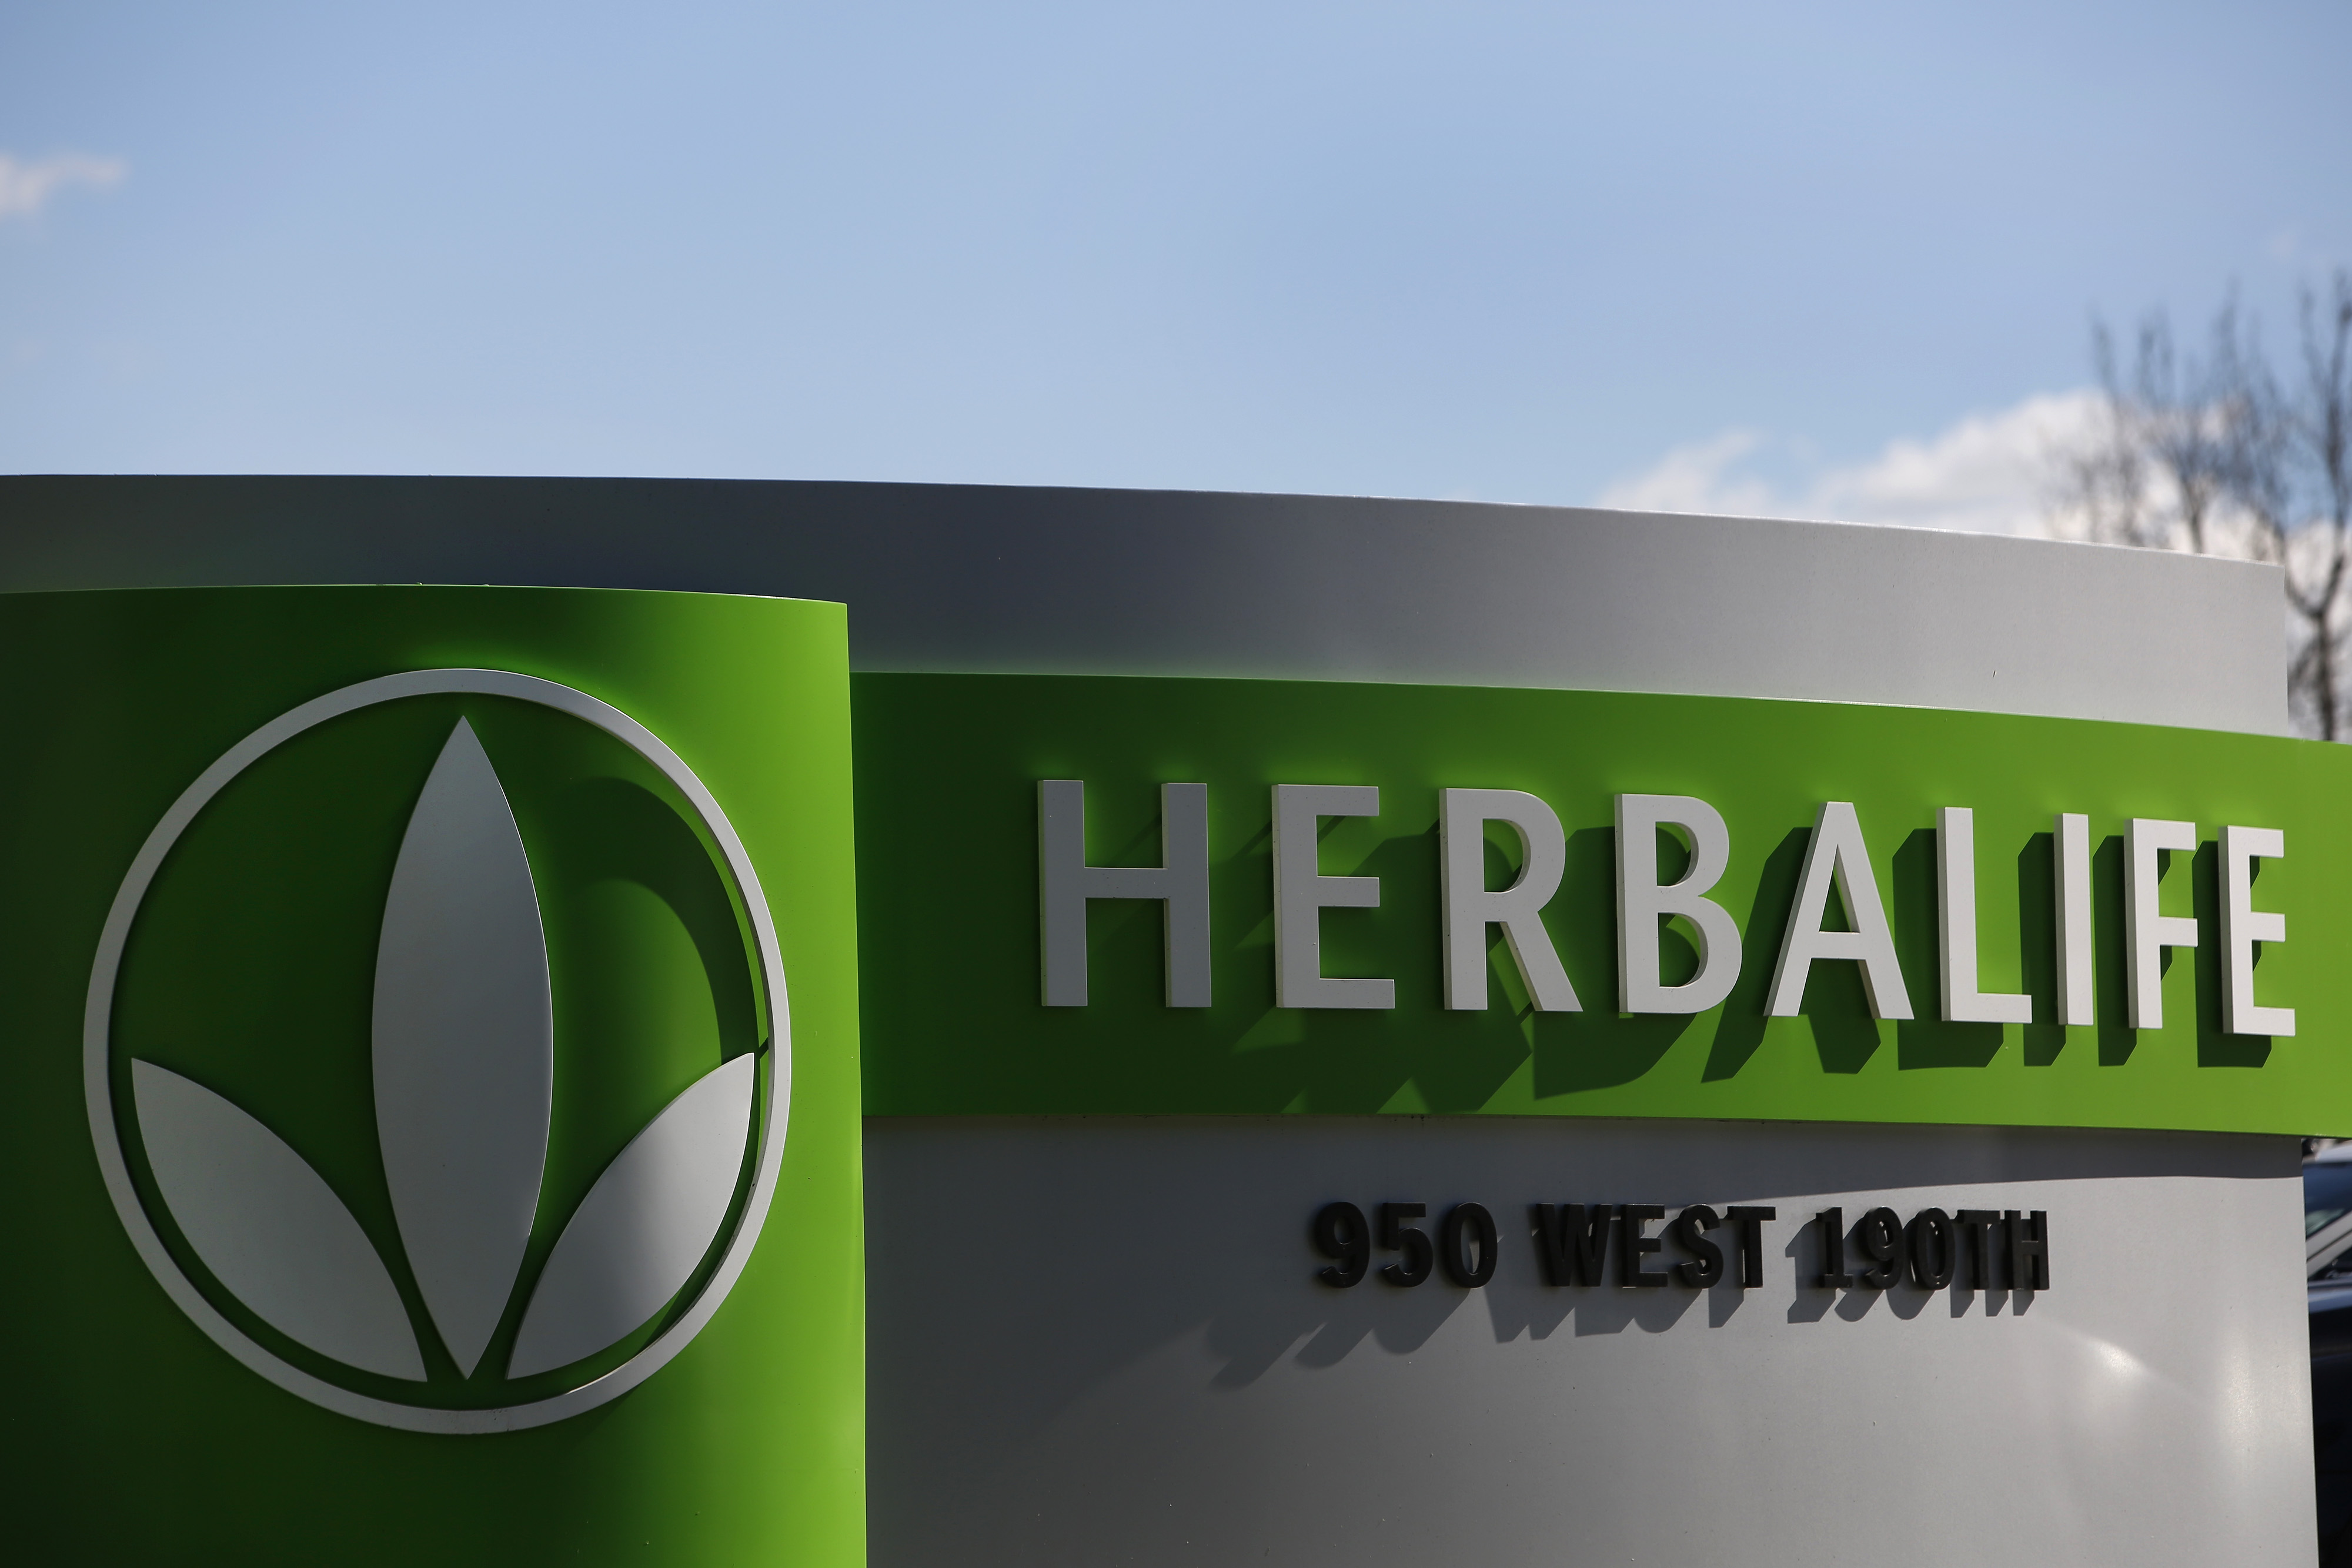 Herbalife Ltd. signage is displayed outside of Herbalife Plaza in Torrance, Calif. on Feb. 3, 2014. (Bloomberg/Getty Images)